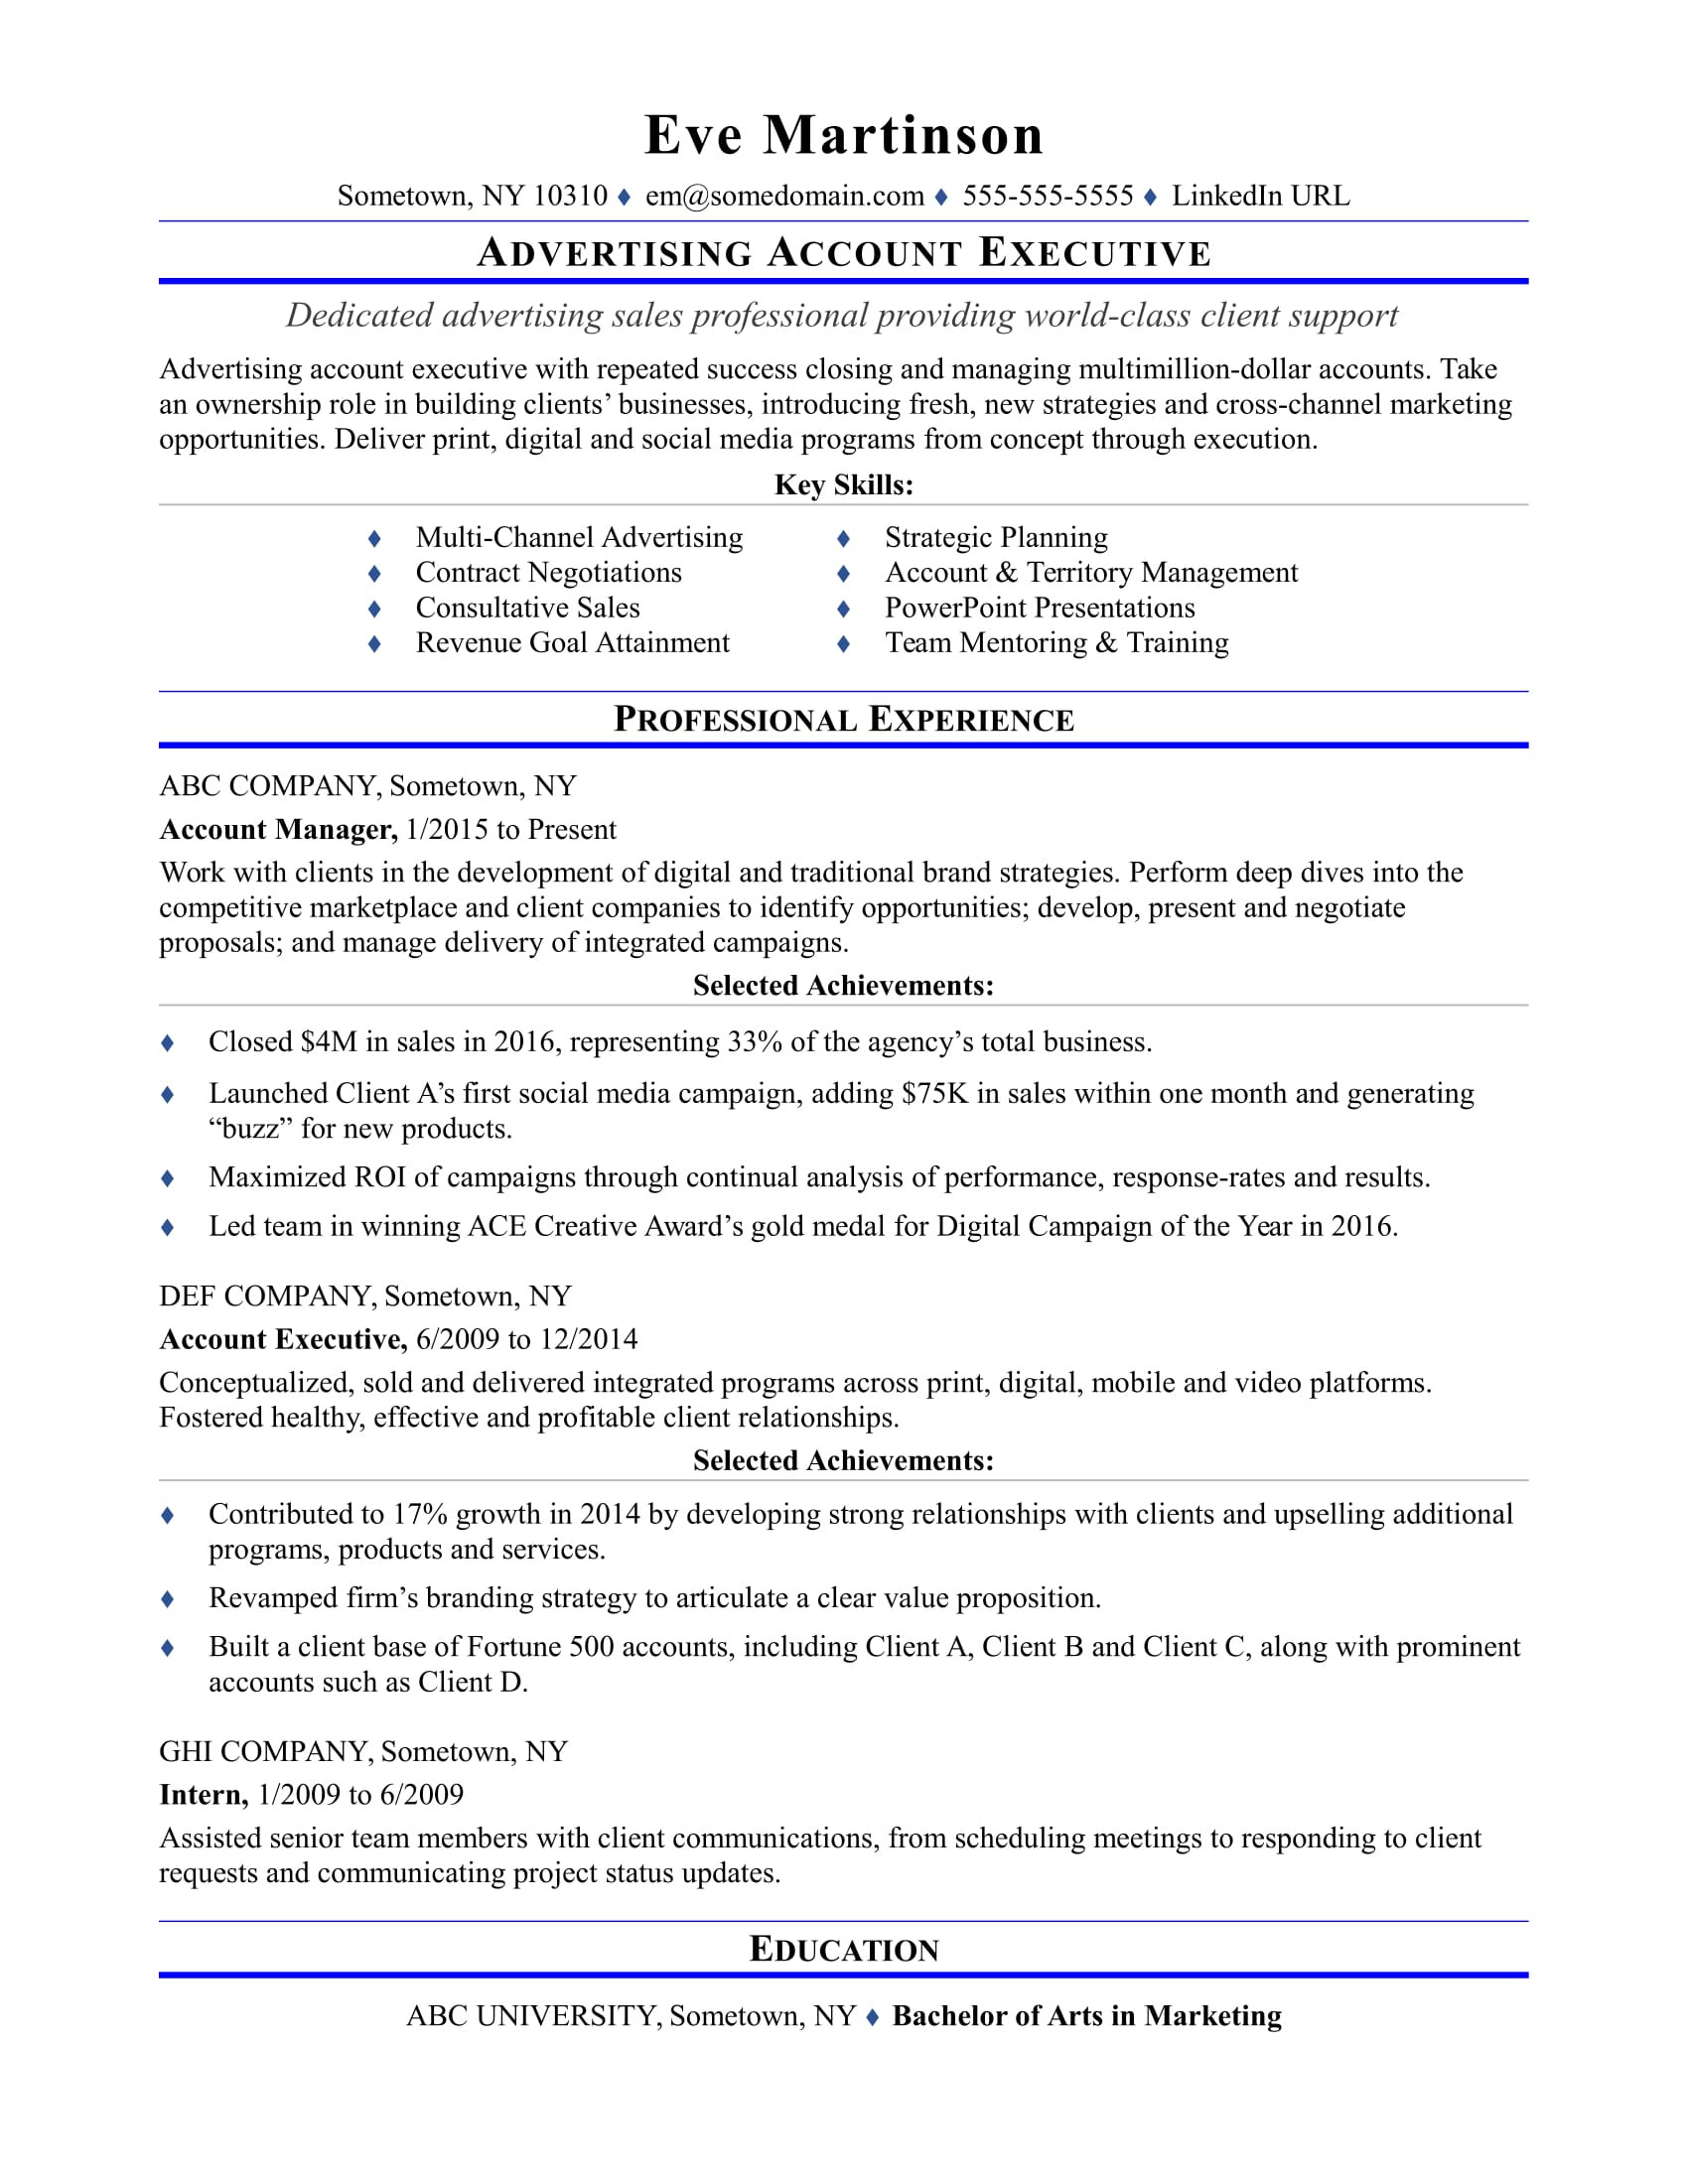 Employee Benefits Account Manager Resume Sample Sample Resume for An Advertising Account Executive Monster.com